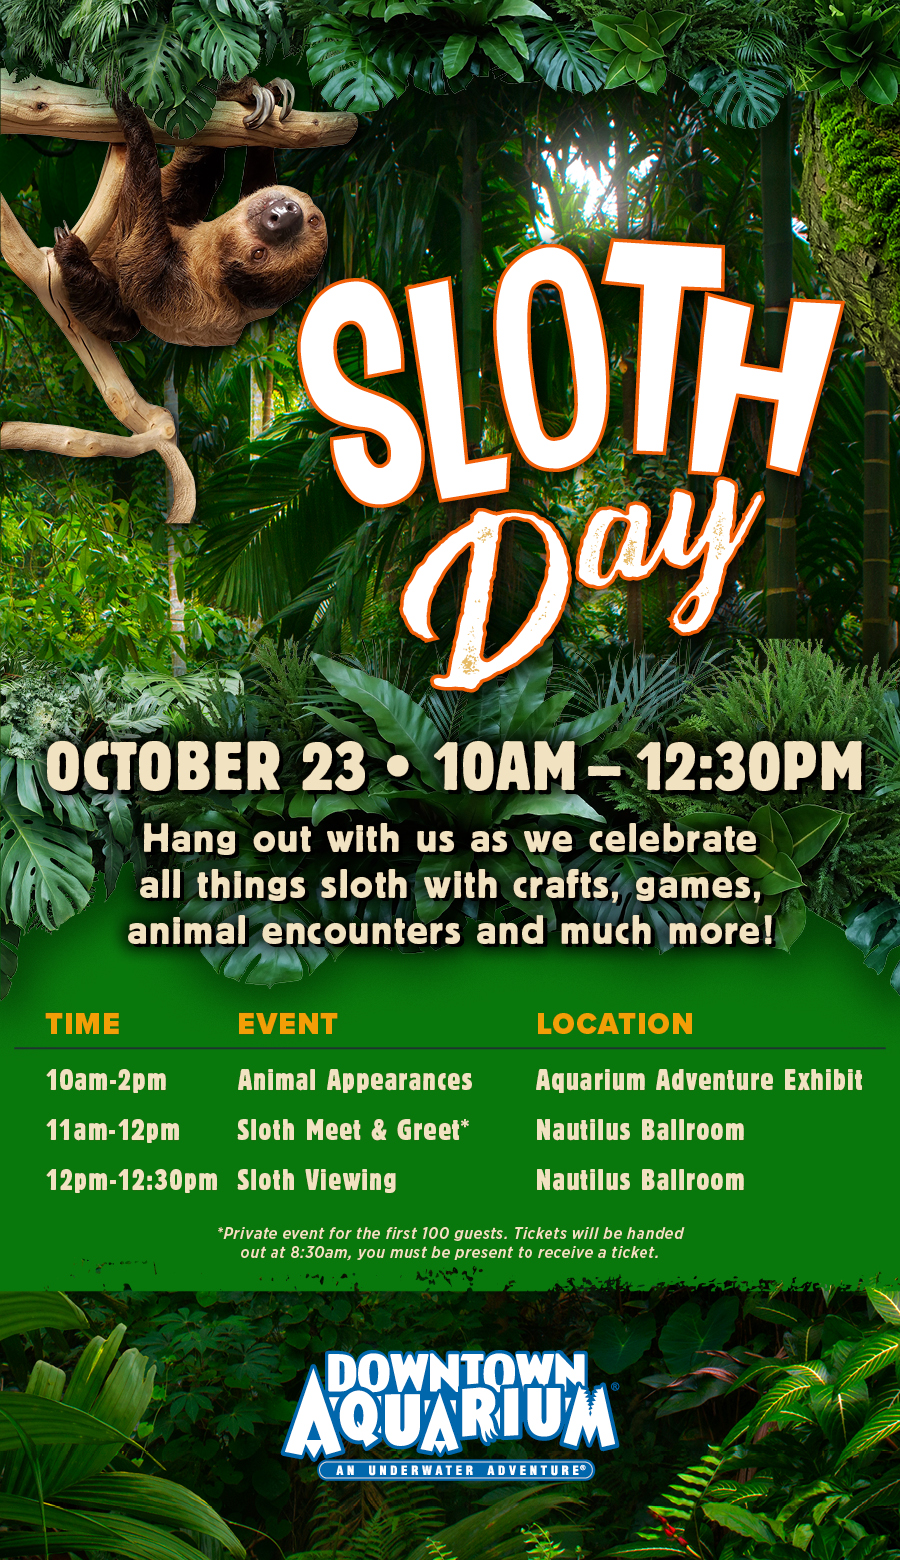 Sloth weekend October 23rd 10am - 2pm.